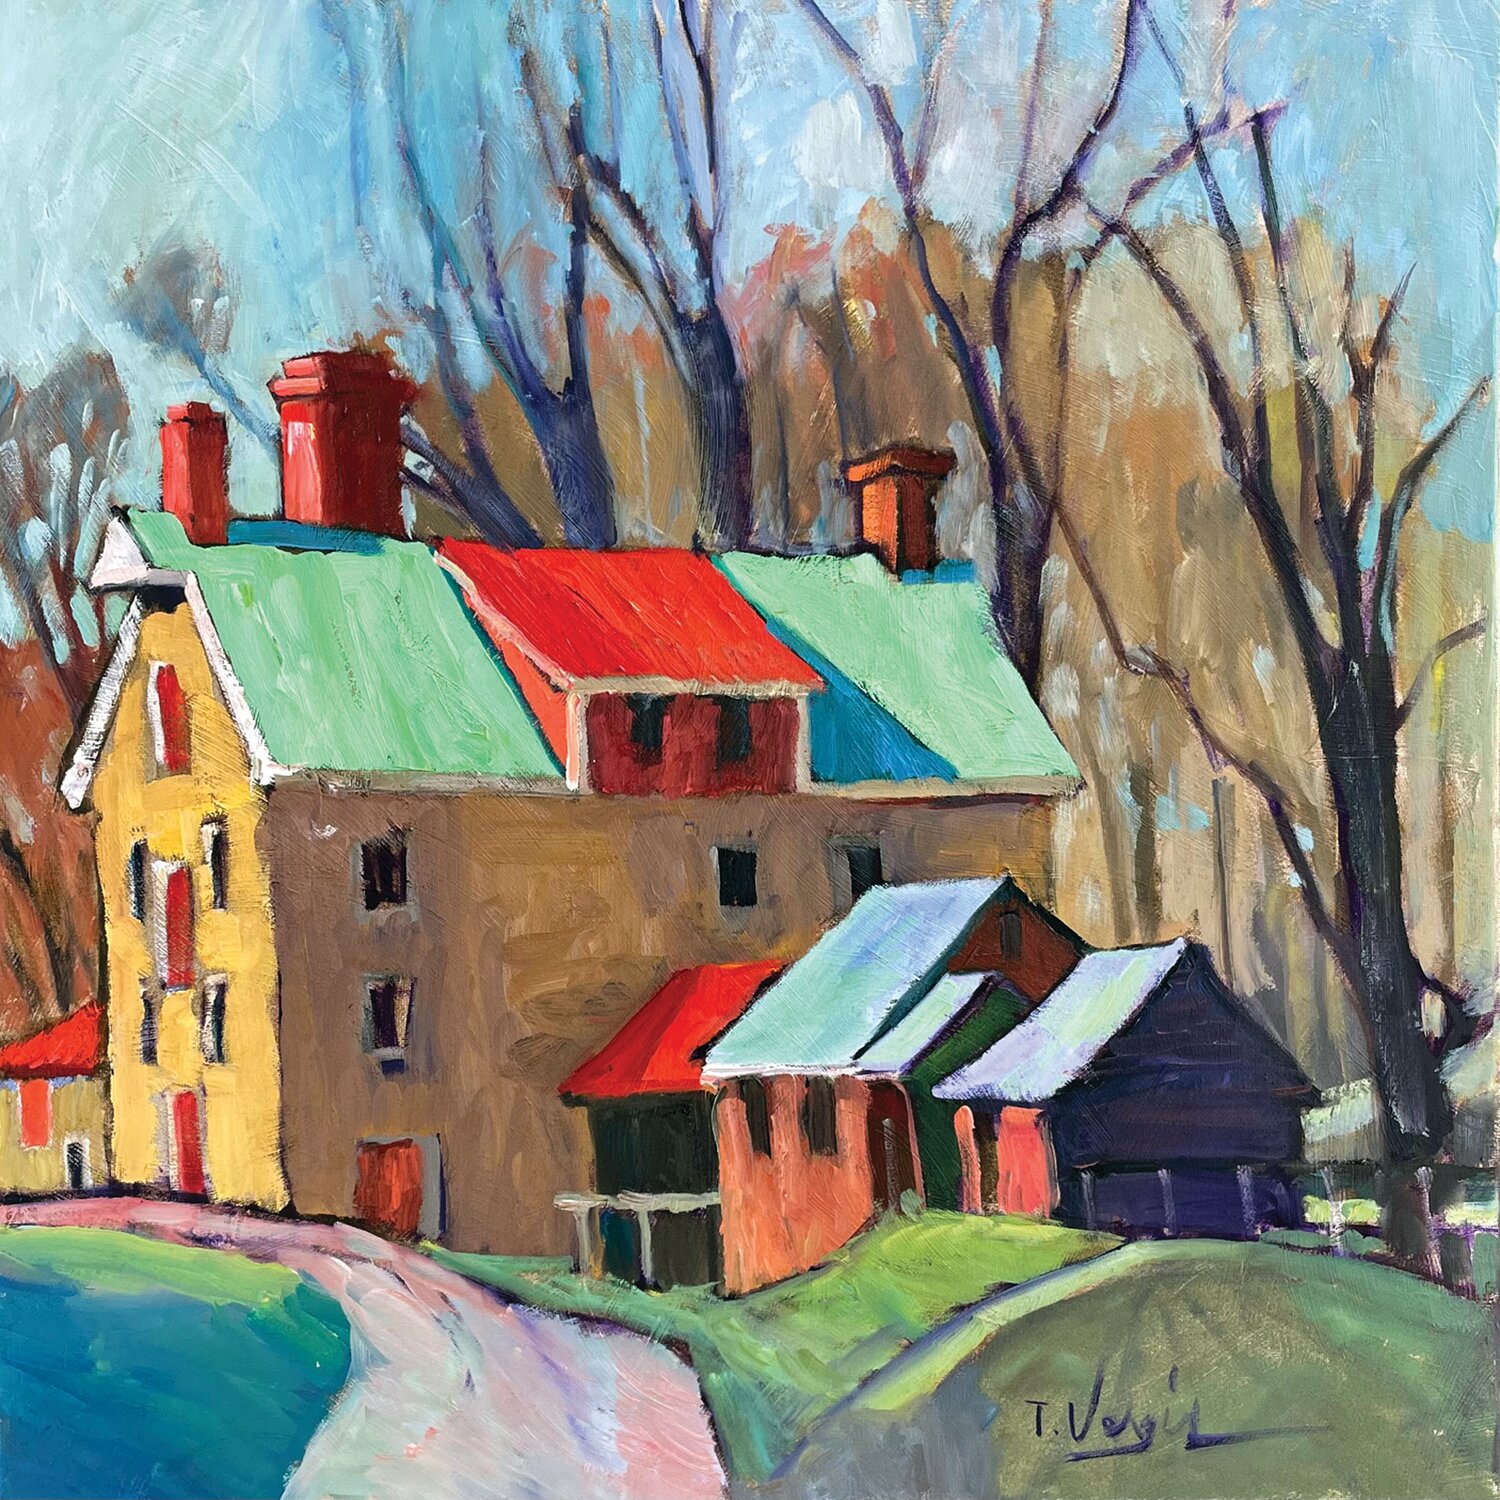 “Stover-Myers Mill, Tinicum,” is an oil on canvas by Trisha Vergis.